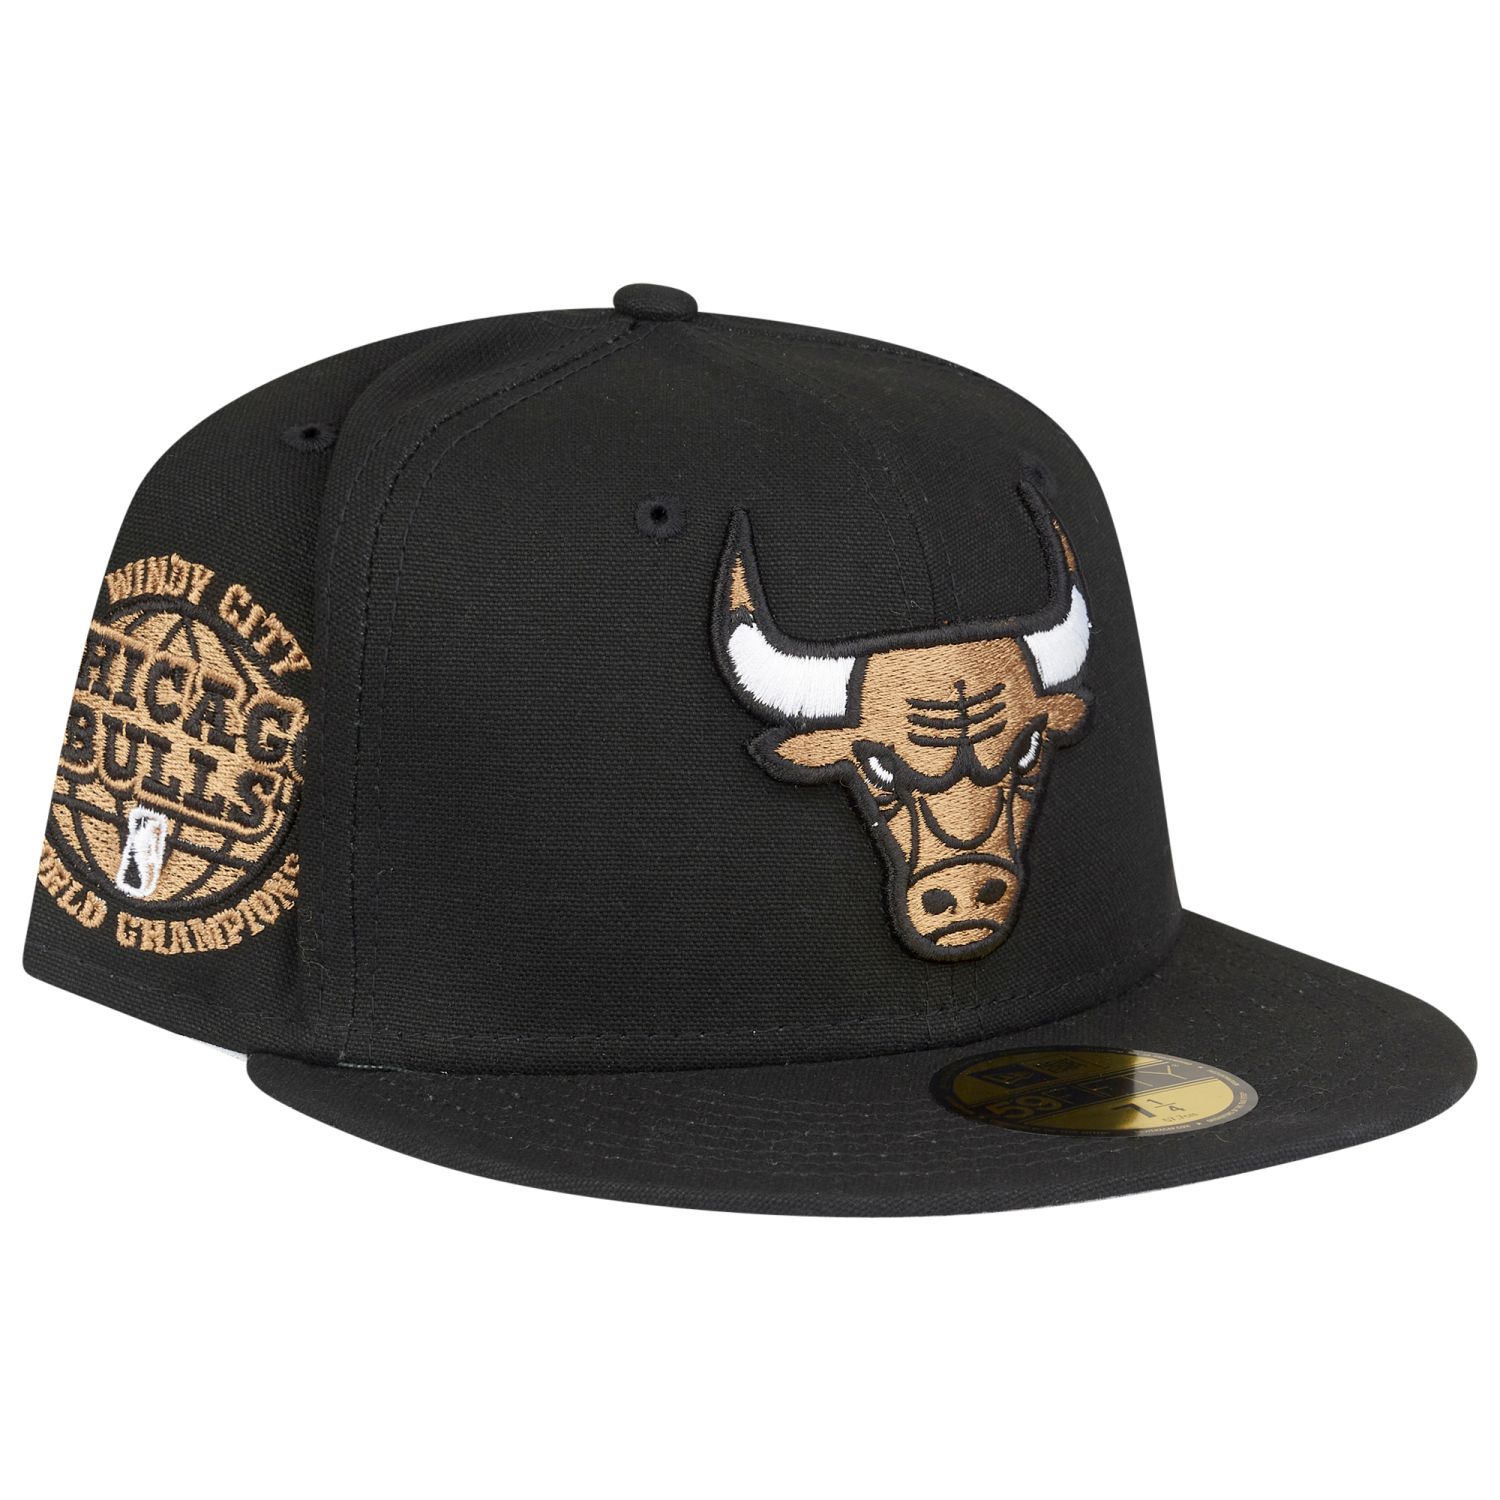 New Era 59Fifty Fitted Cap - CHAMPIONS Chicago Bulls black, Fitted, Caps